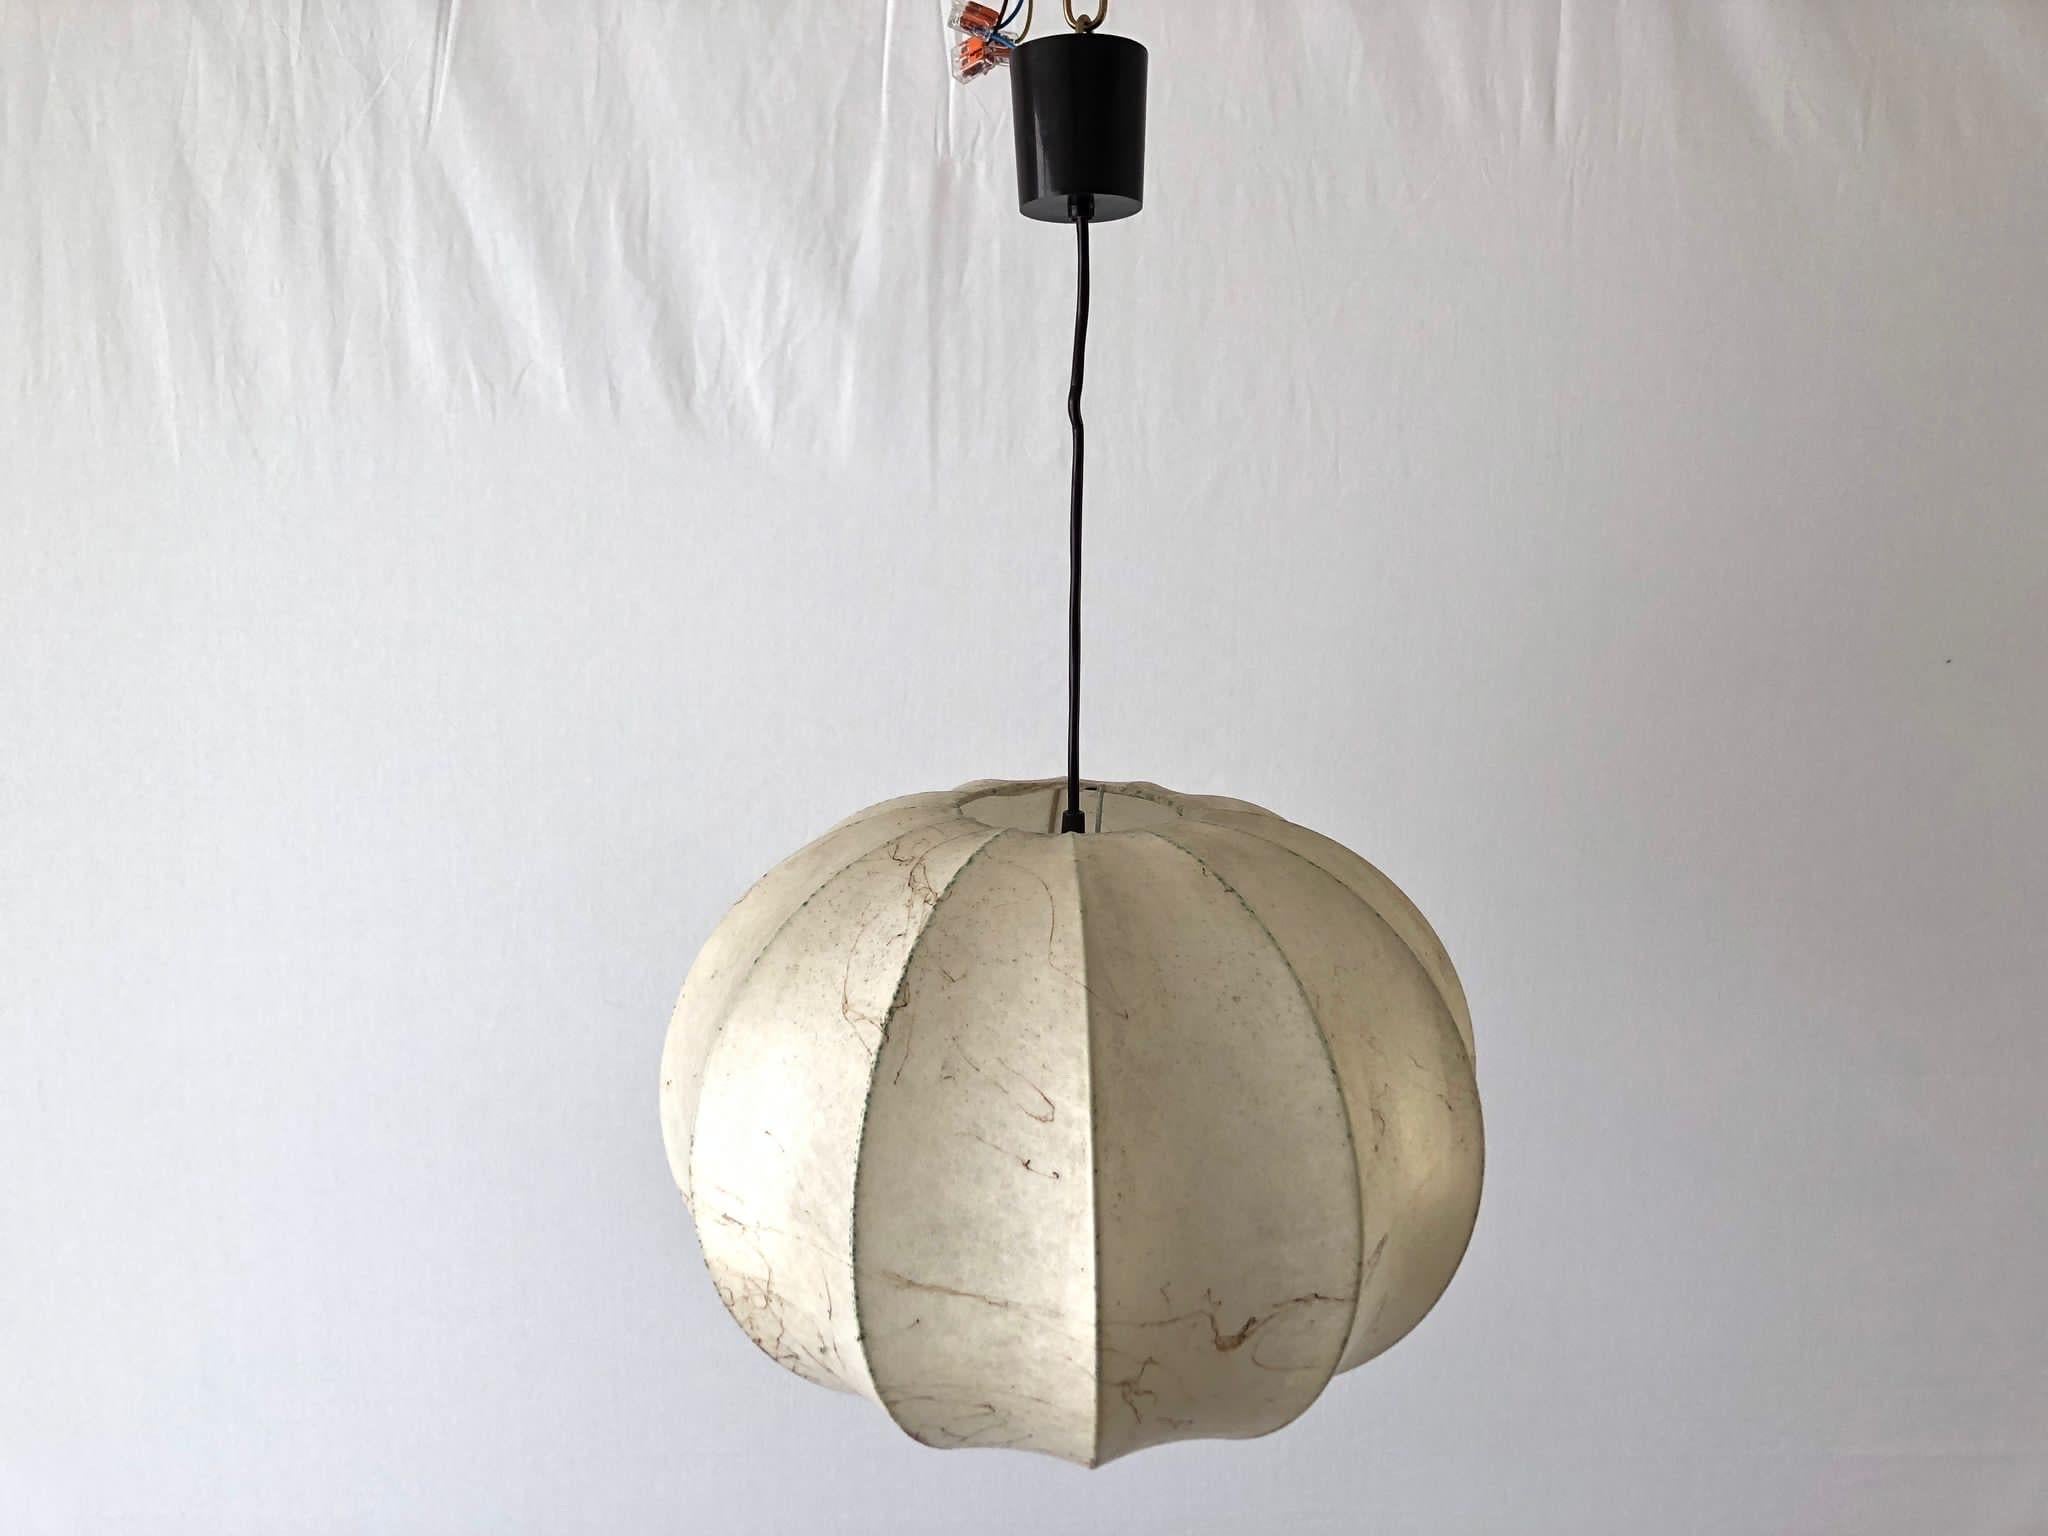 Cocoon pendant lamp by Goldkant, 1960s, Germany


Lampshade is in very good vintage condition.

This lamp works with E27 light bulbs. 
Wired and suitable to use with 220V and 110V for all countries.

Measurements:
Height: 63 cm
Shade diameter and